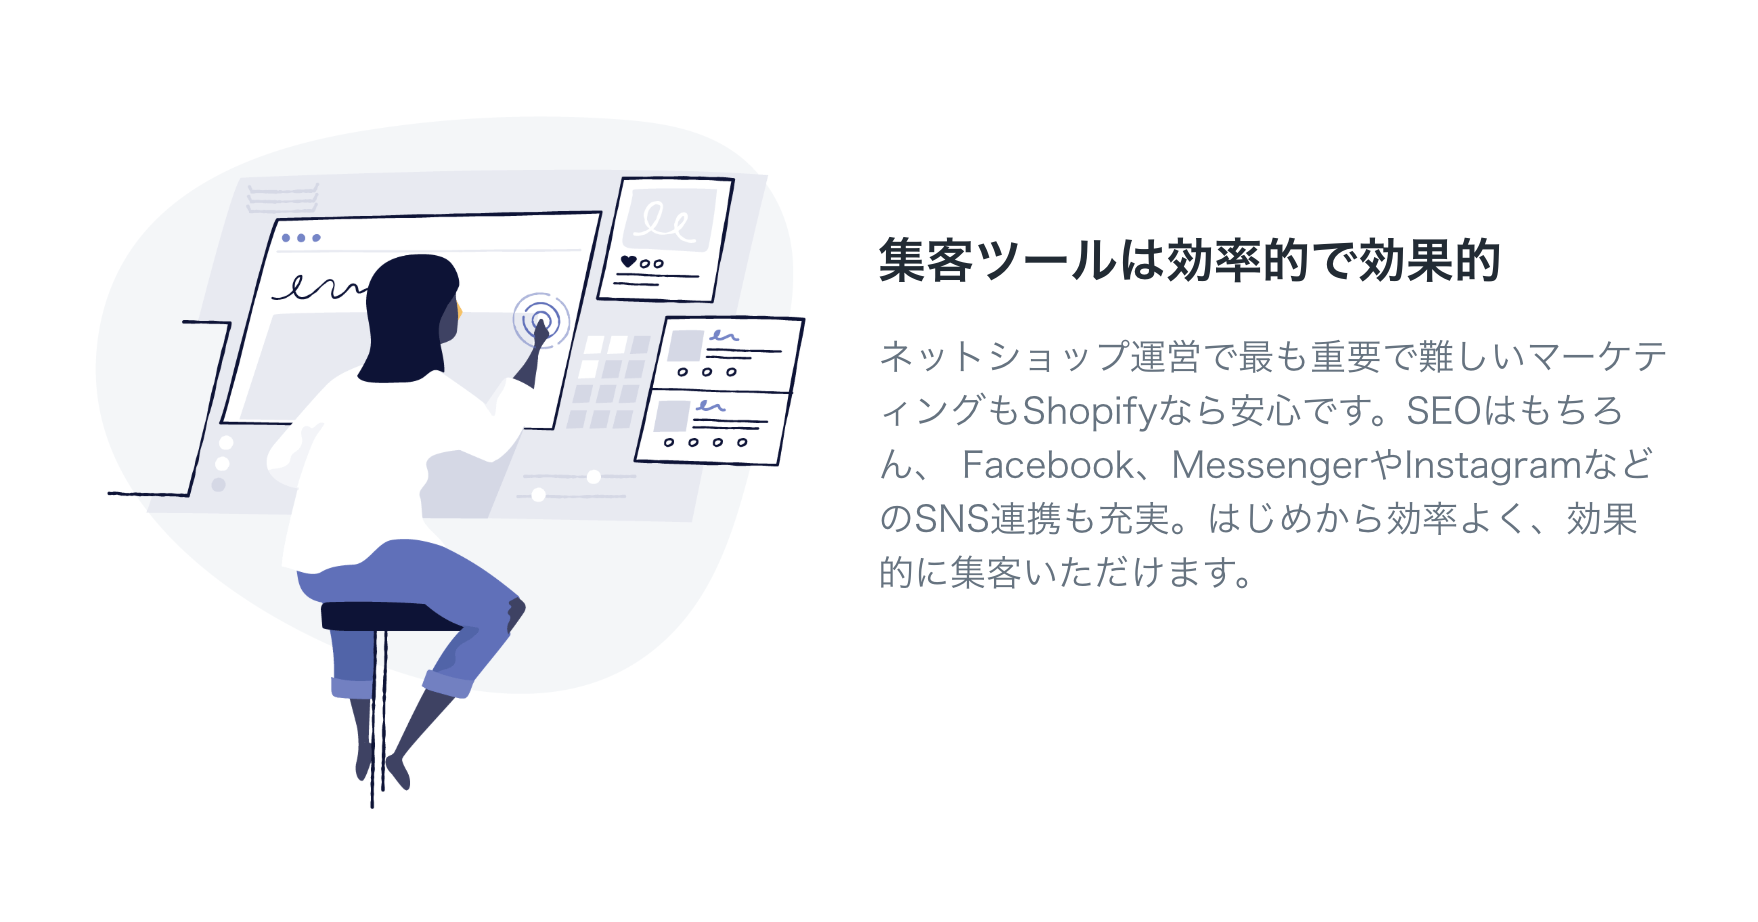 hreflang for multilingual stores - Japan features